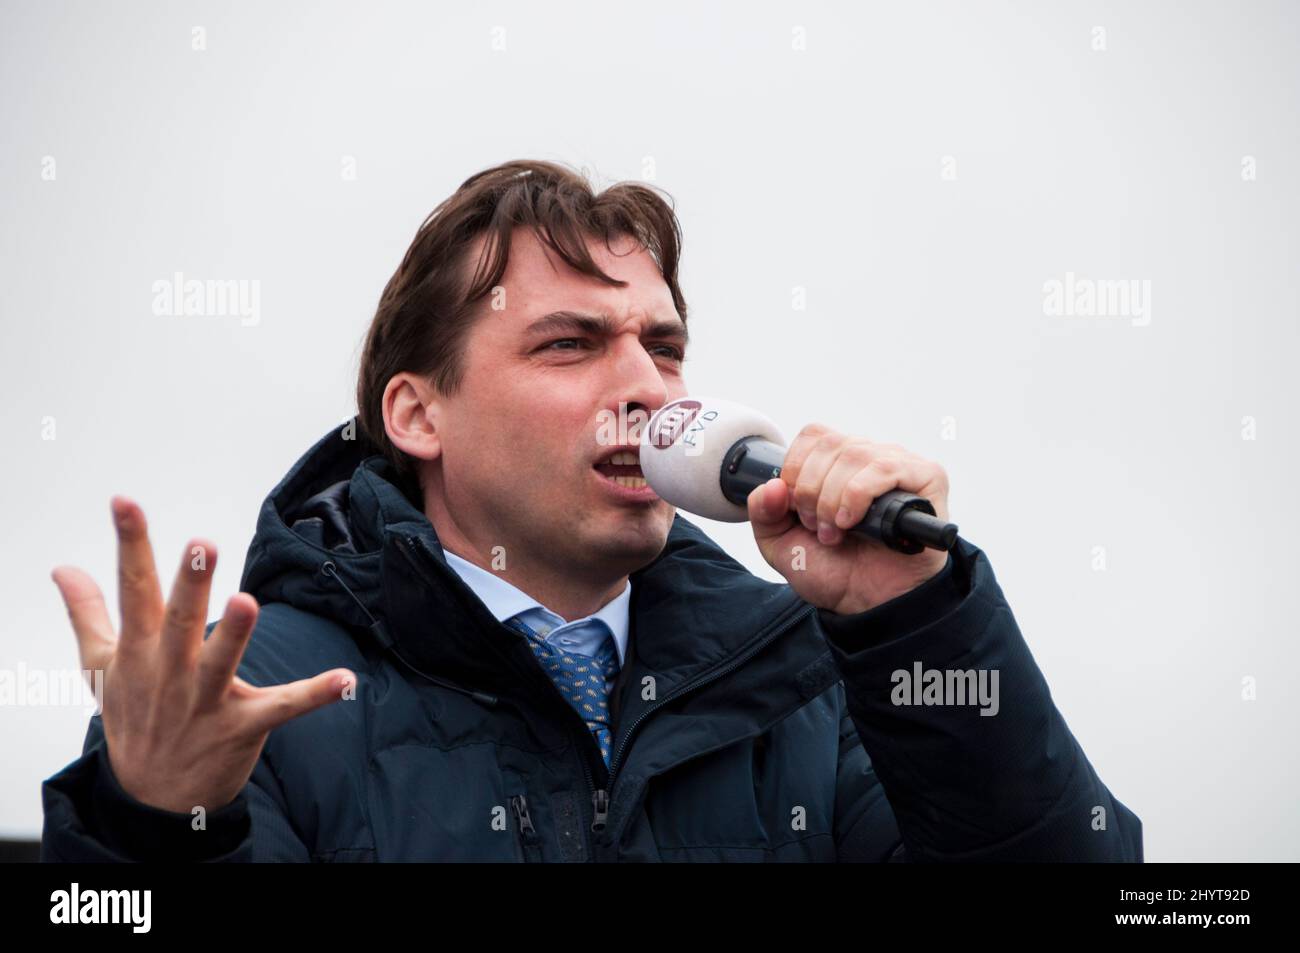 03-16-2021.Leiden,Netherlands.Dutch politician Thierry Baudet speaking at a rally of Forum voor Democratie ,a Dutch right wing/conservative party Stock Photo